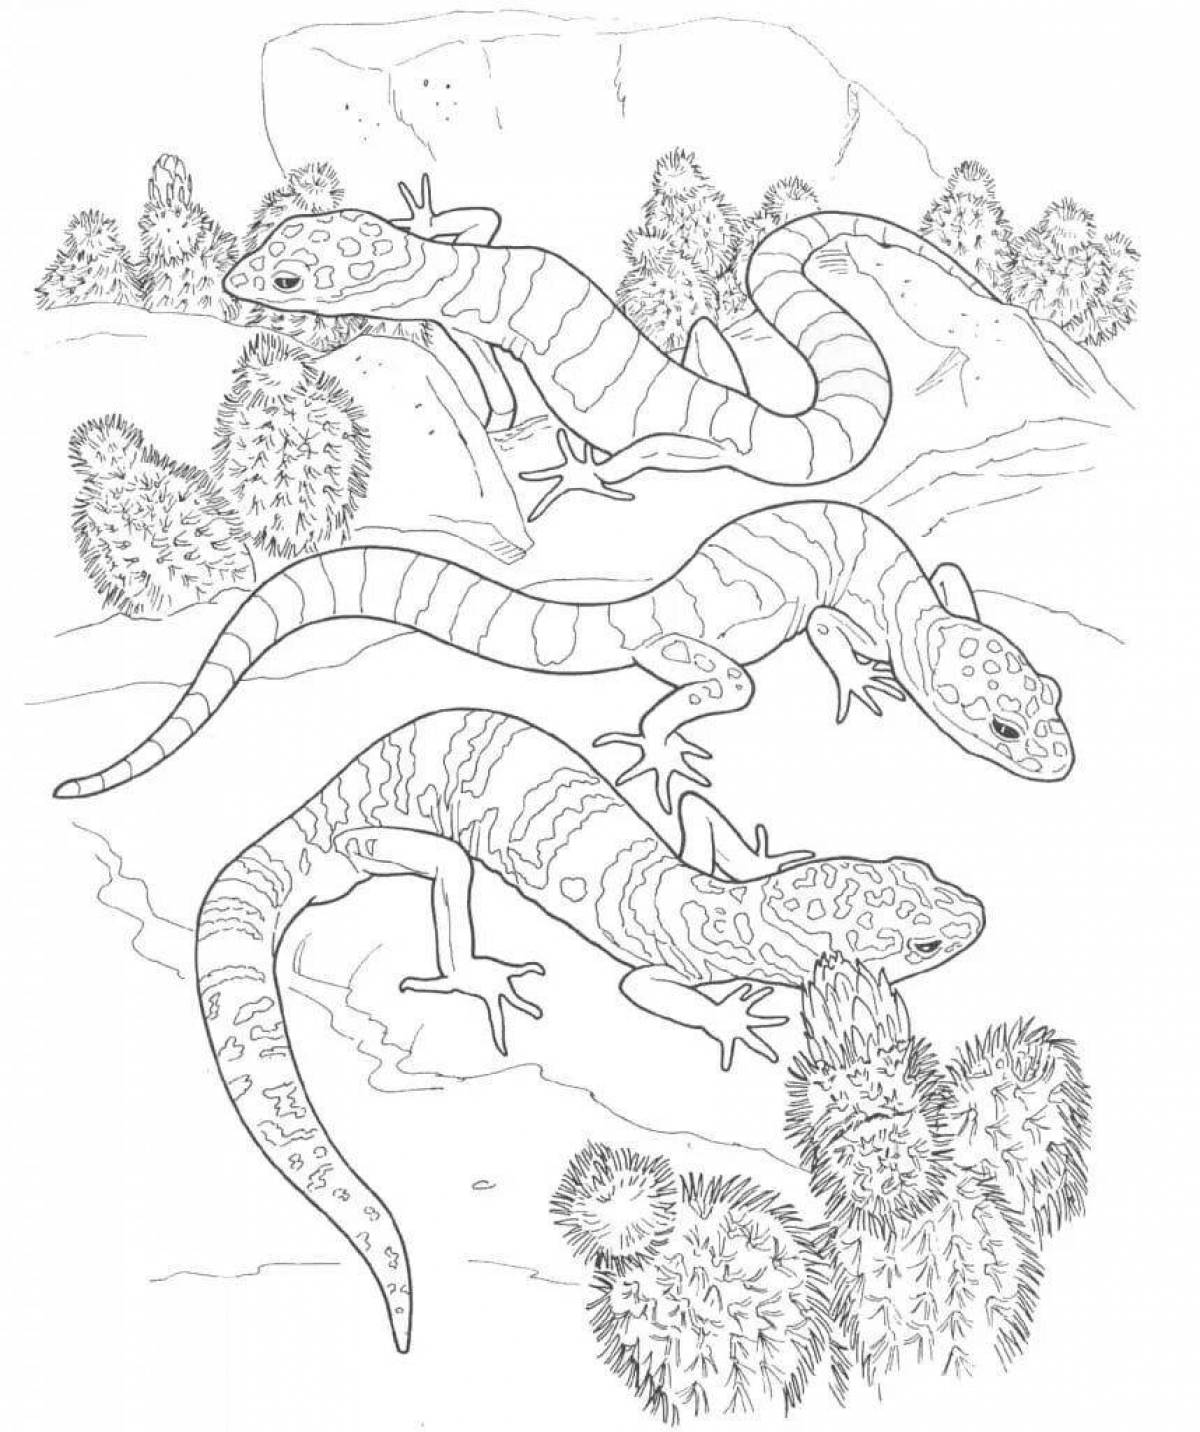 Impressive reptile coloring pages